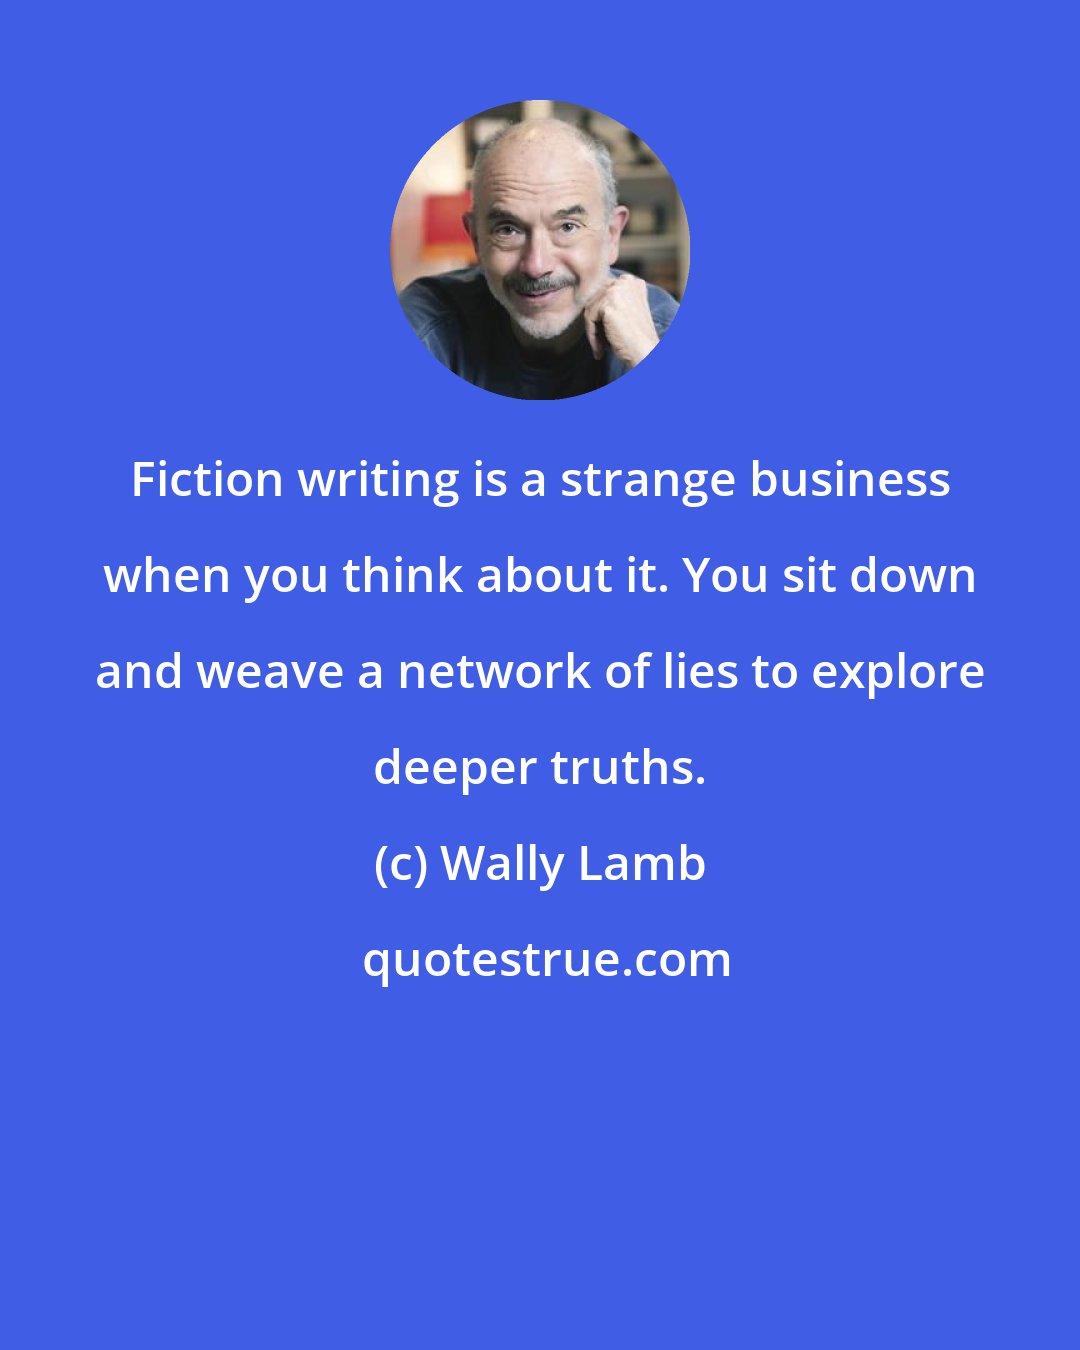 Wally Lamb: Fiction writing is a strange business when you think about it. You sit down and weave a network of lies to explore deeper truths.